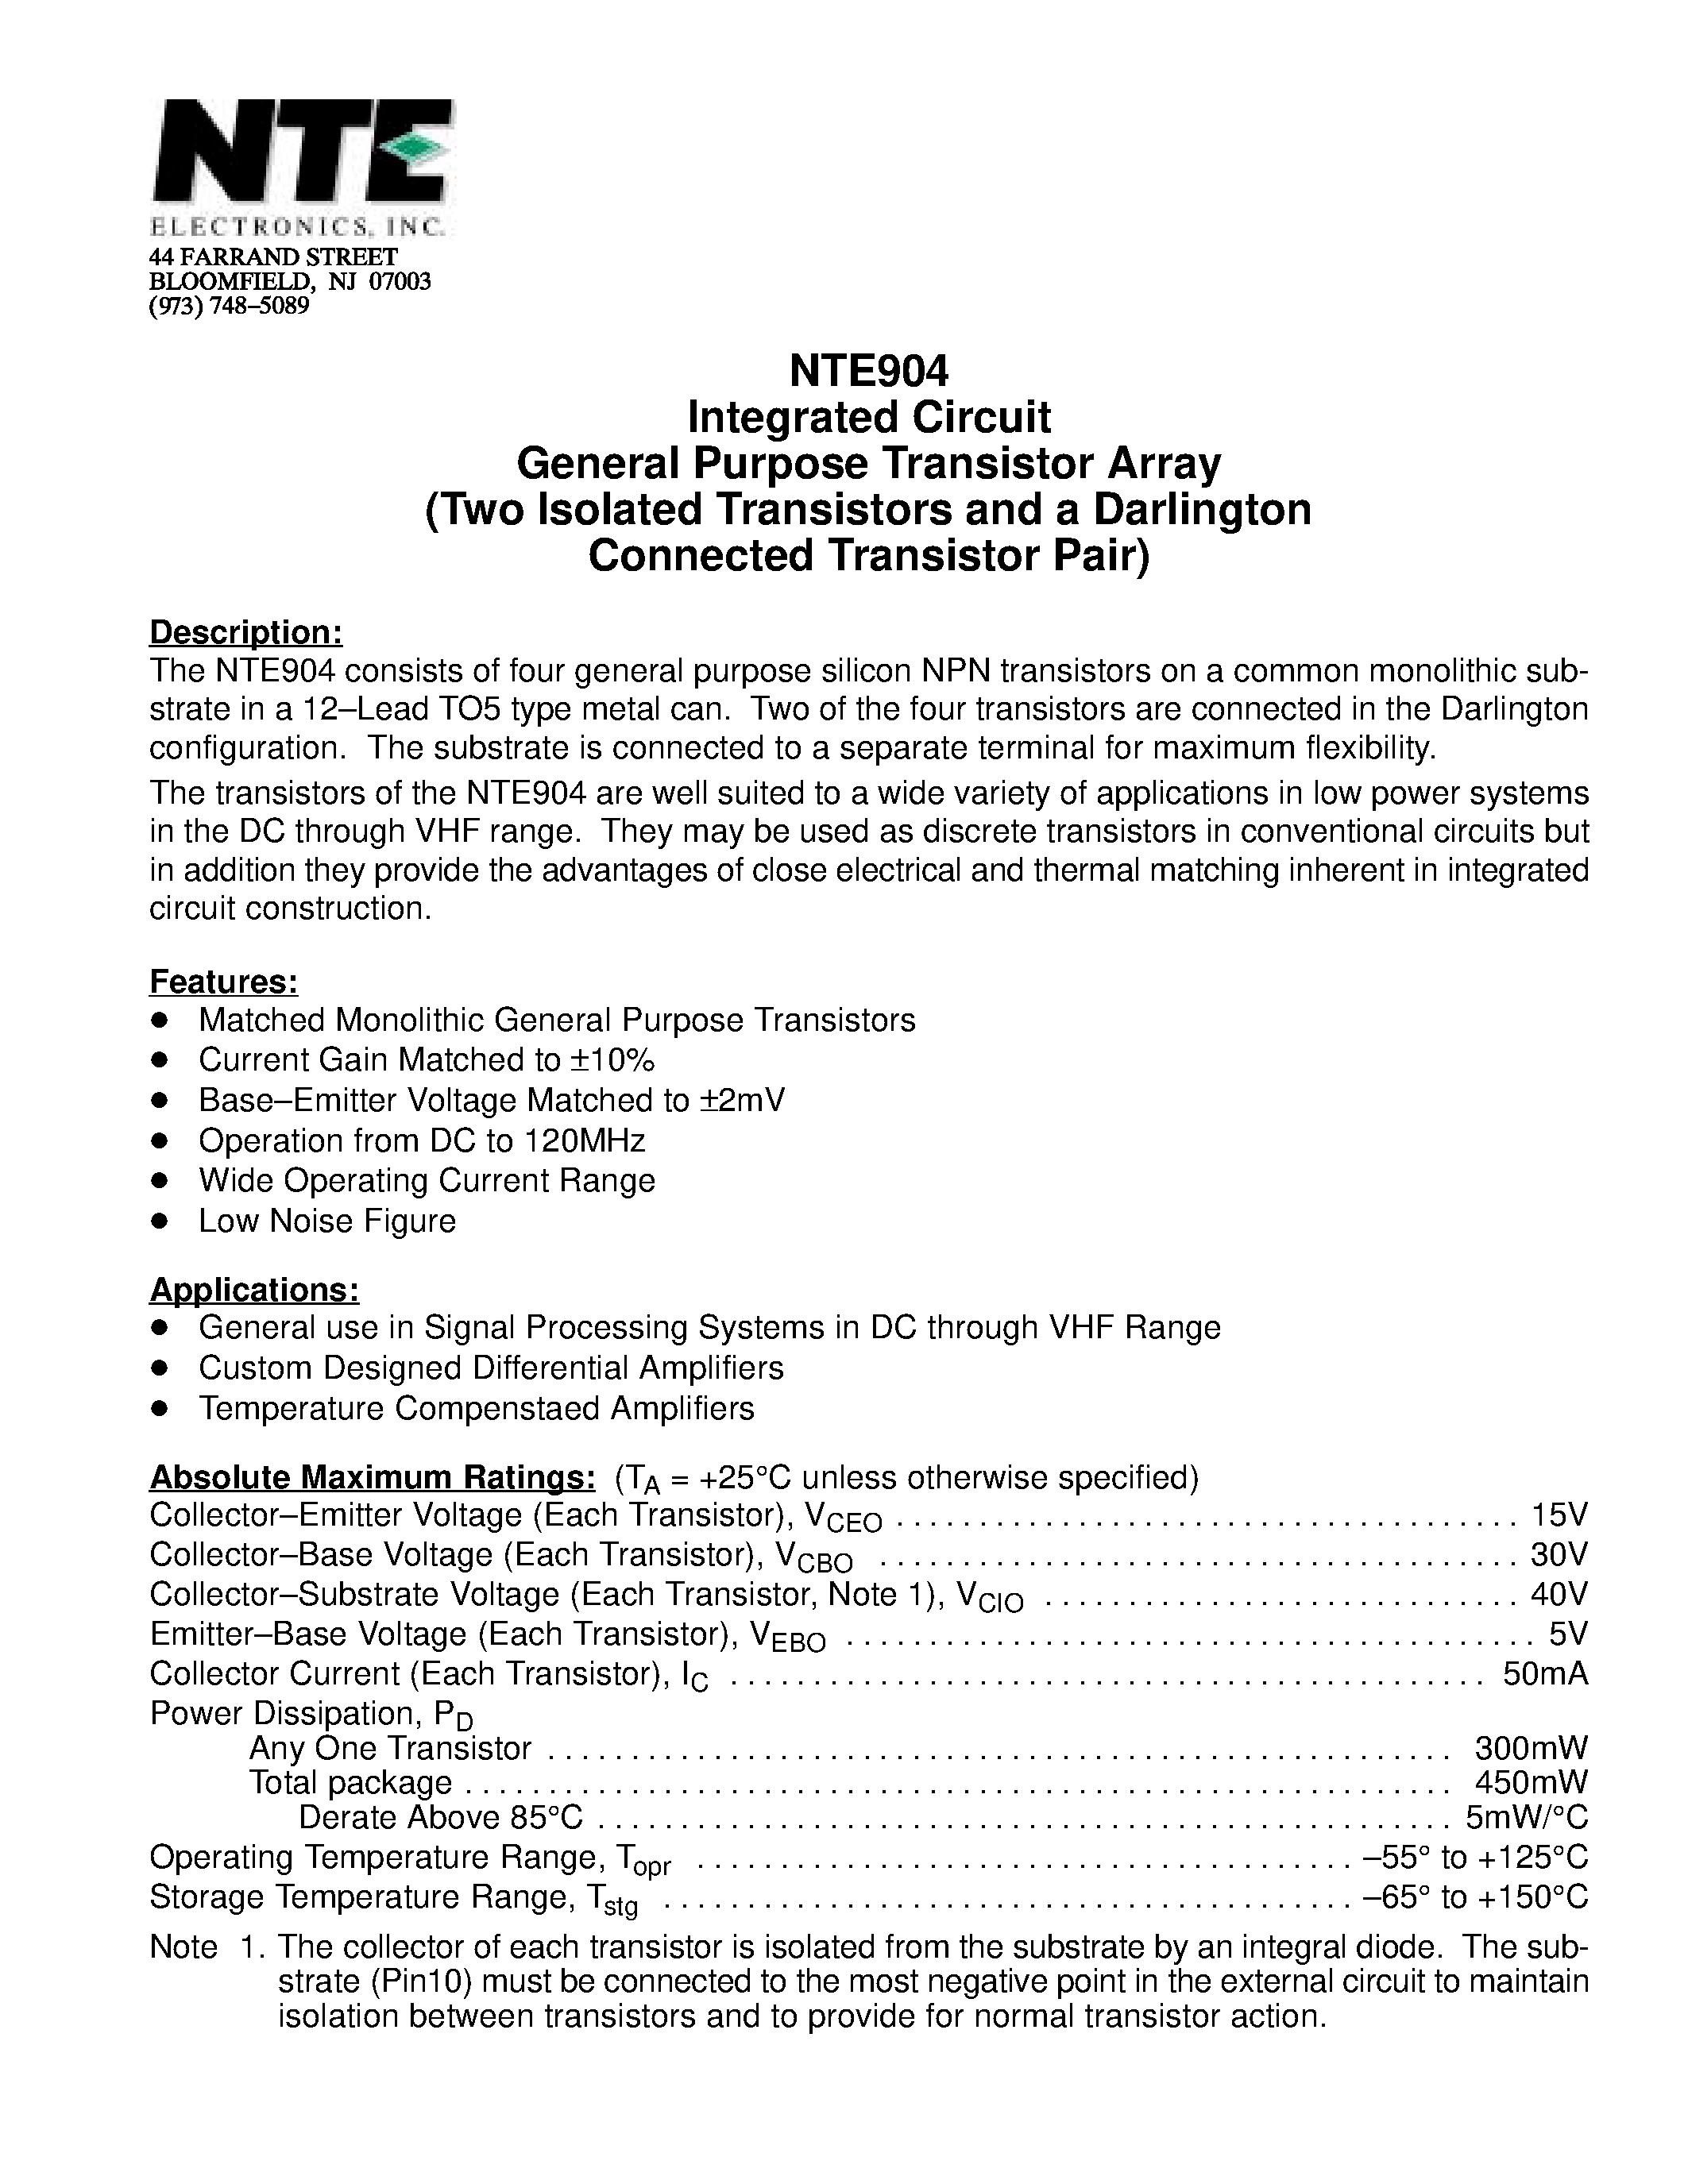 Datasheet NTE904 - Integrated Circuit General Purpose Transistor Array (Two Isolated Transistors and a Darlington Connected Transistor Pair) page 1